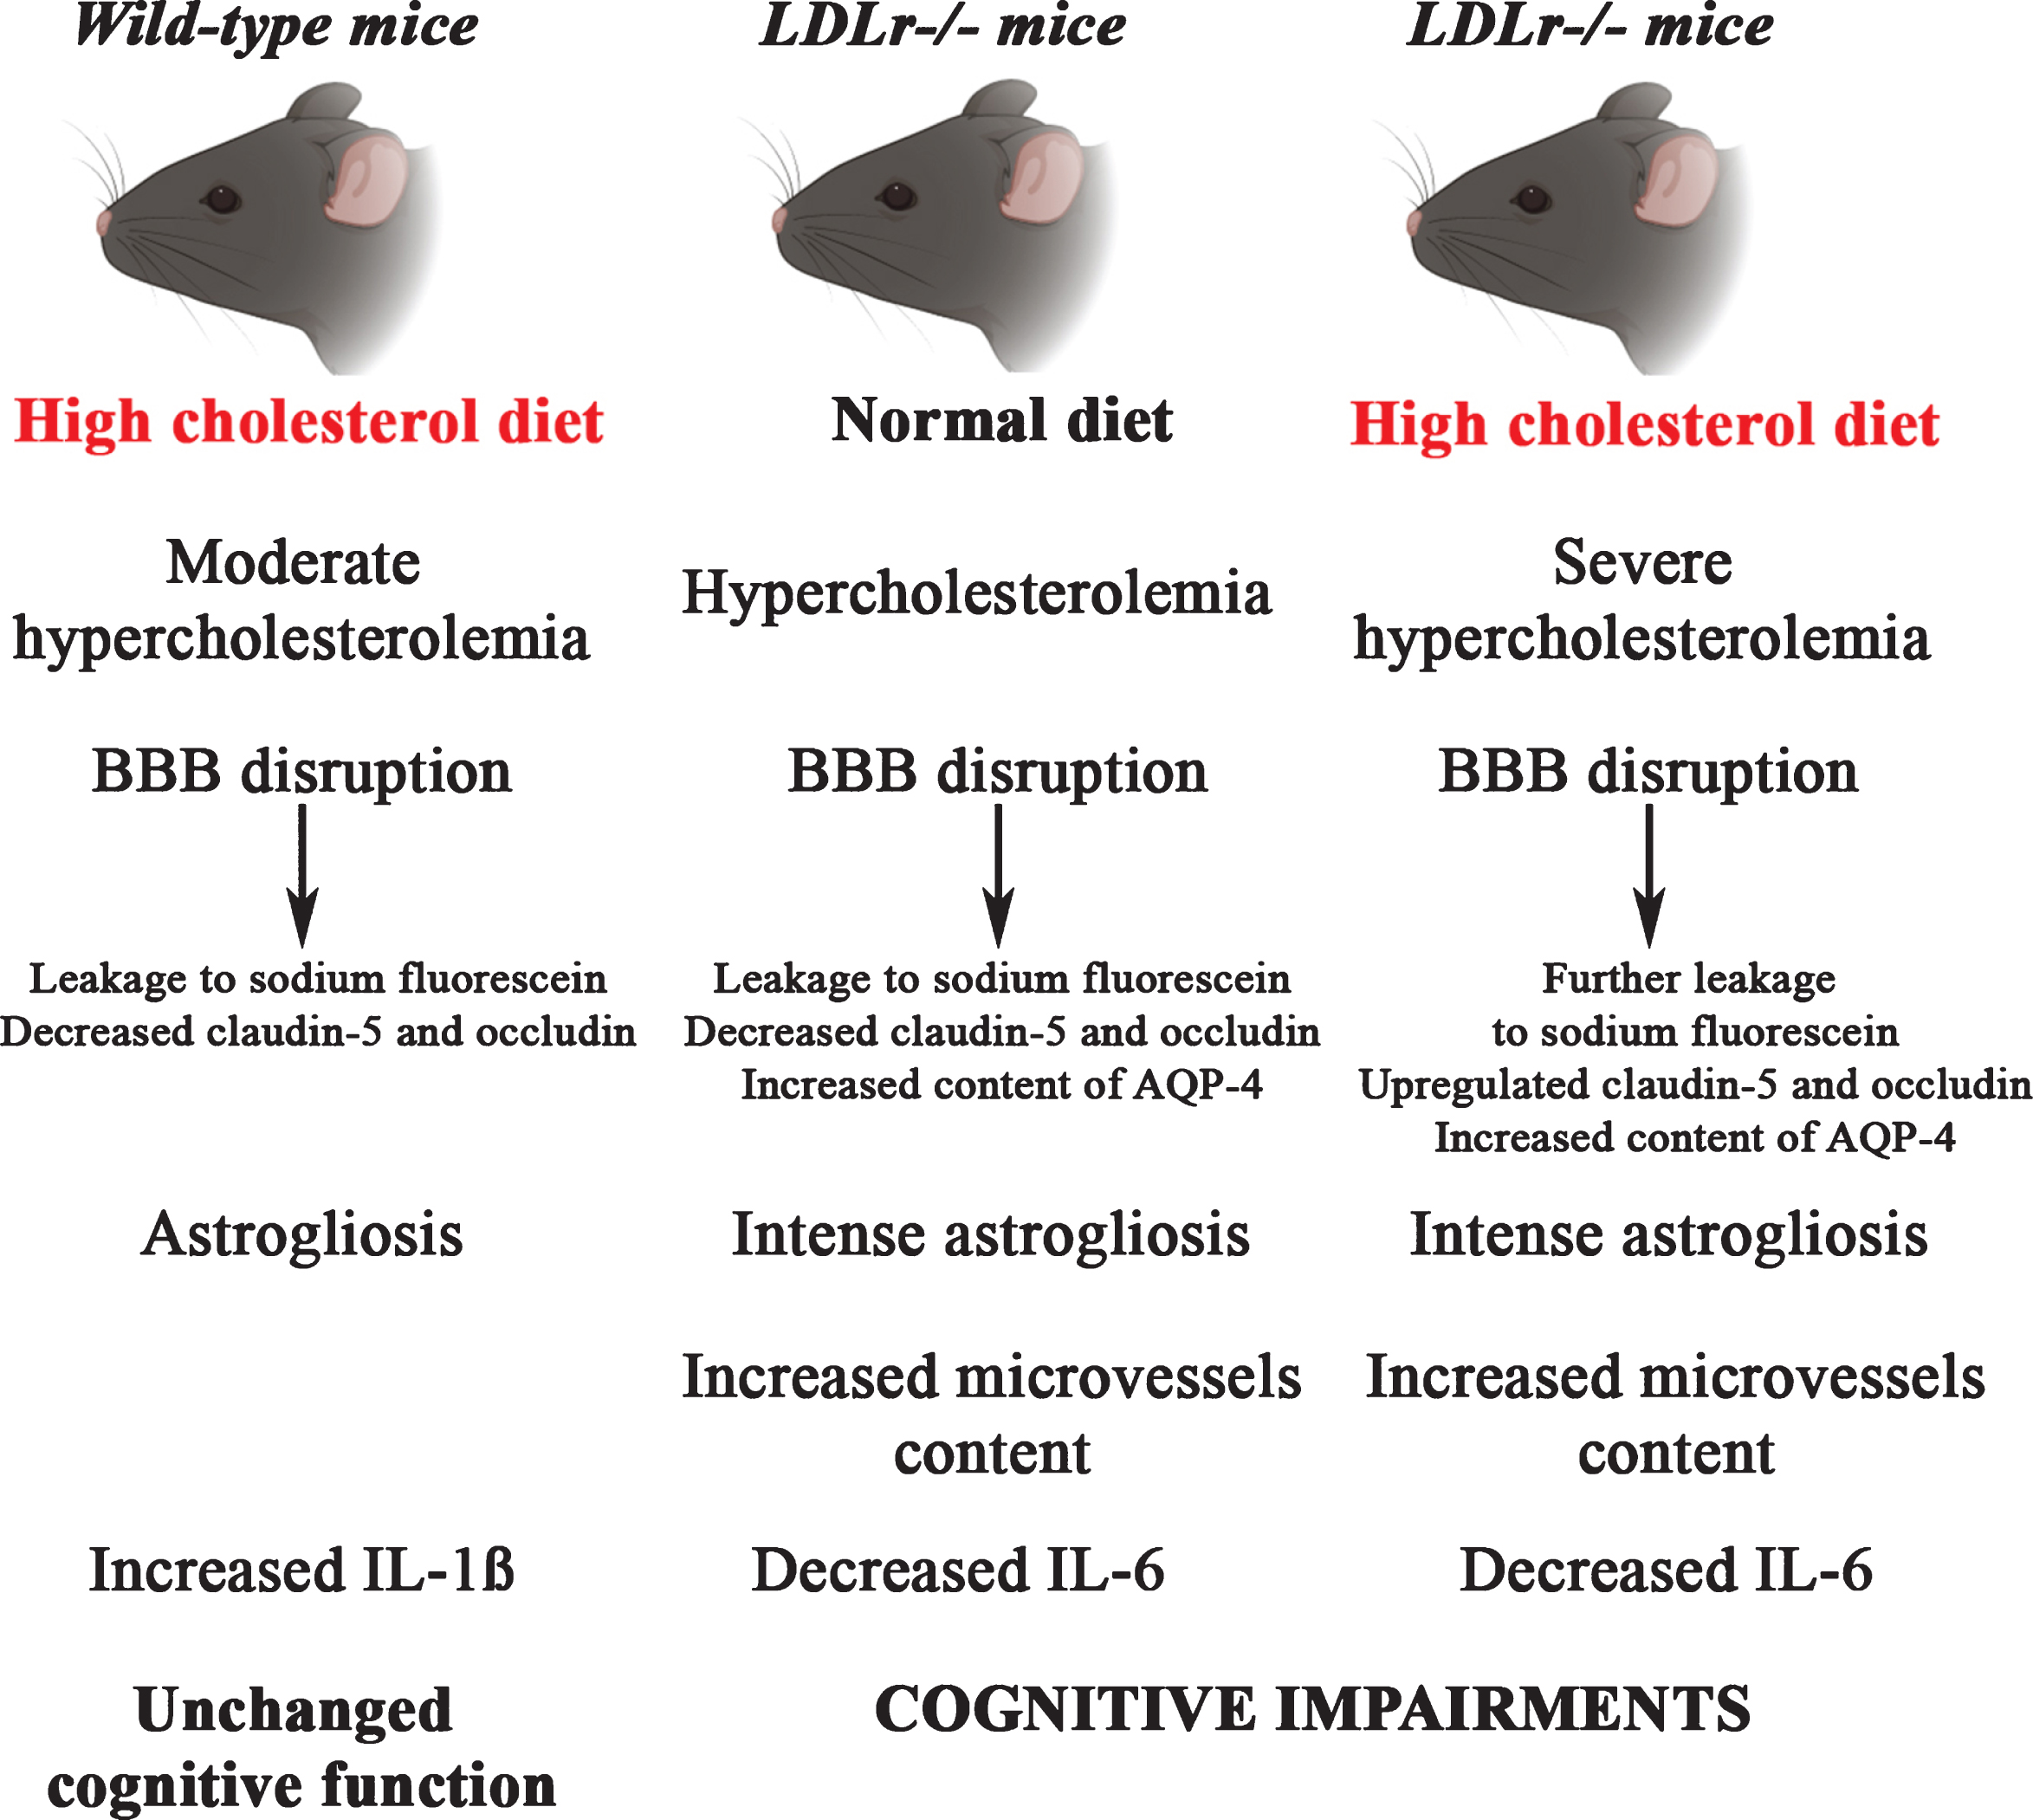 An illustrative scheme summarizing the main findings in C57BL/6 and LDLr–/– mice after a high cholesterol diet. The LDLr–/– mice, which already presented increased levels of plasma cholesterol, after a high cholesterol diet exhibited severe hypercholesterolemia. The hypercholesterolemia in LDLr–/– induced leakage of BBB was associated with intense astrogliosis, increased microvessels content, and decreased levels of IL-6, which ultimately caused cognitive impairments. The LDLr–/– mice exposed to high cholesterol diet exhibited a further increase in the leakage to sodium fluorescein in the hippocampus and prefrontal cortex, which was associated with an upregulation in the gene expression of claudin-5 and occludin in the hippocampus. On the other hand, C57BL/6 mice fed with a high cholesterol diet displayed moderate hypercholesterolemia that was also associated with BBB disruption, but not with significant induction of the neuroinflammatory process and, therefore, did not cause alterations on cognitive function.